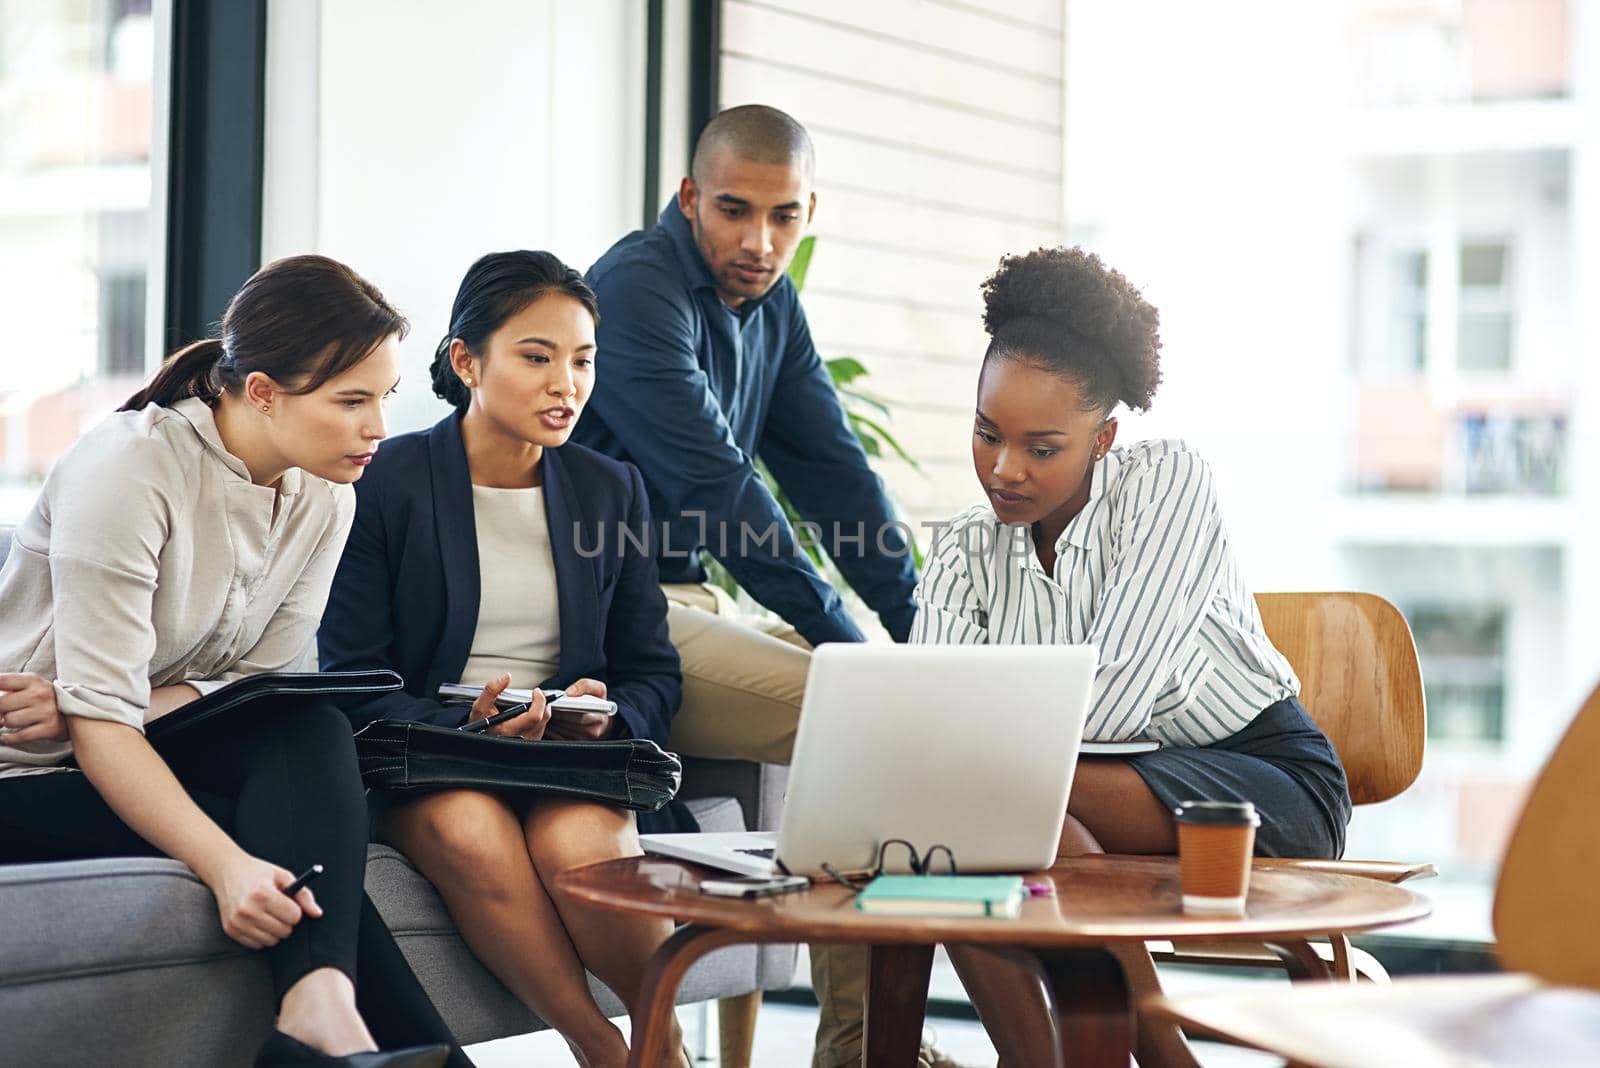 Shot of a group of businesspeople talking together over a laptop during a meeting.